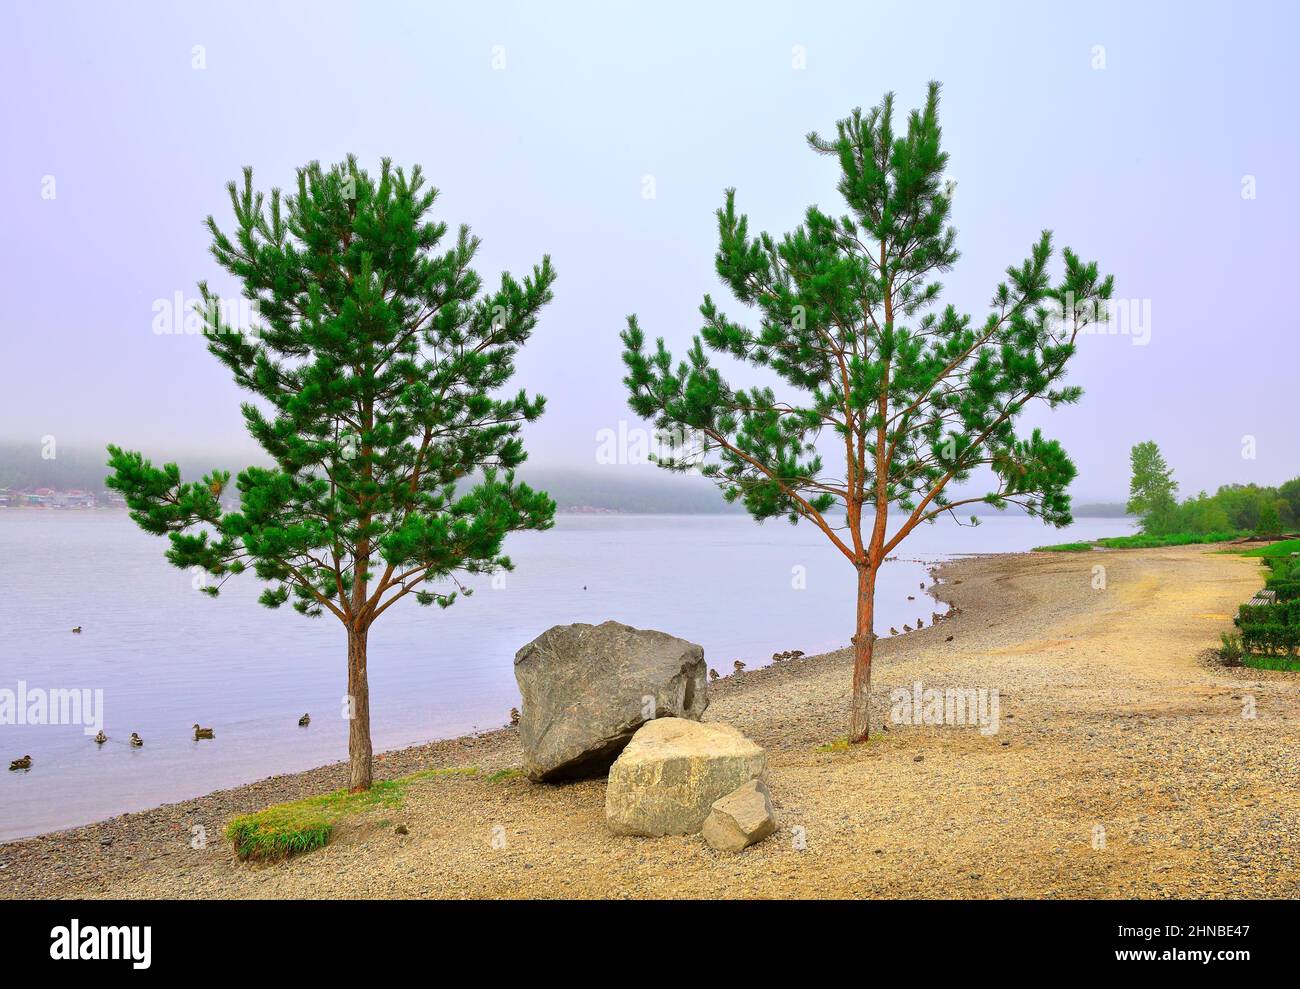 Two pine trees among the stones by the river, ducks on the water. Krasnoyarsk, Siberia, Russia Stock Photo